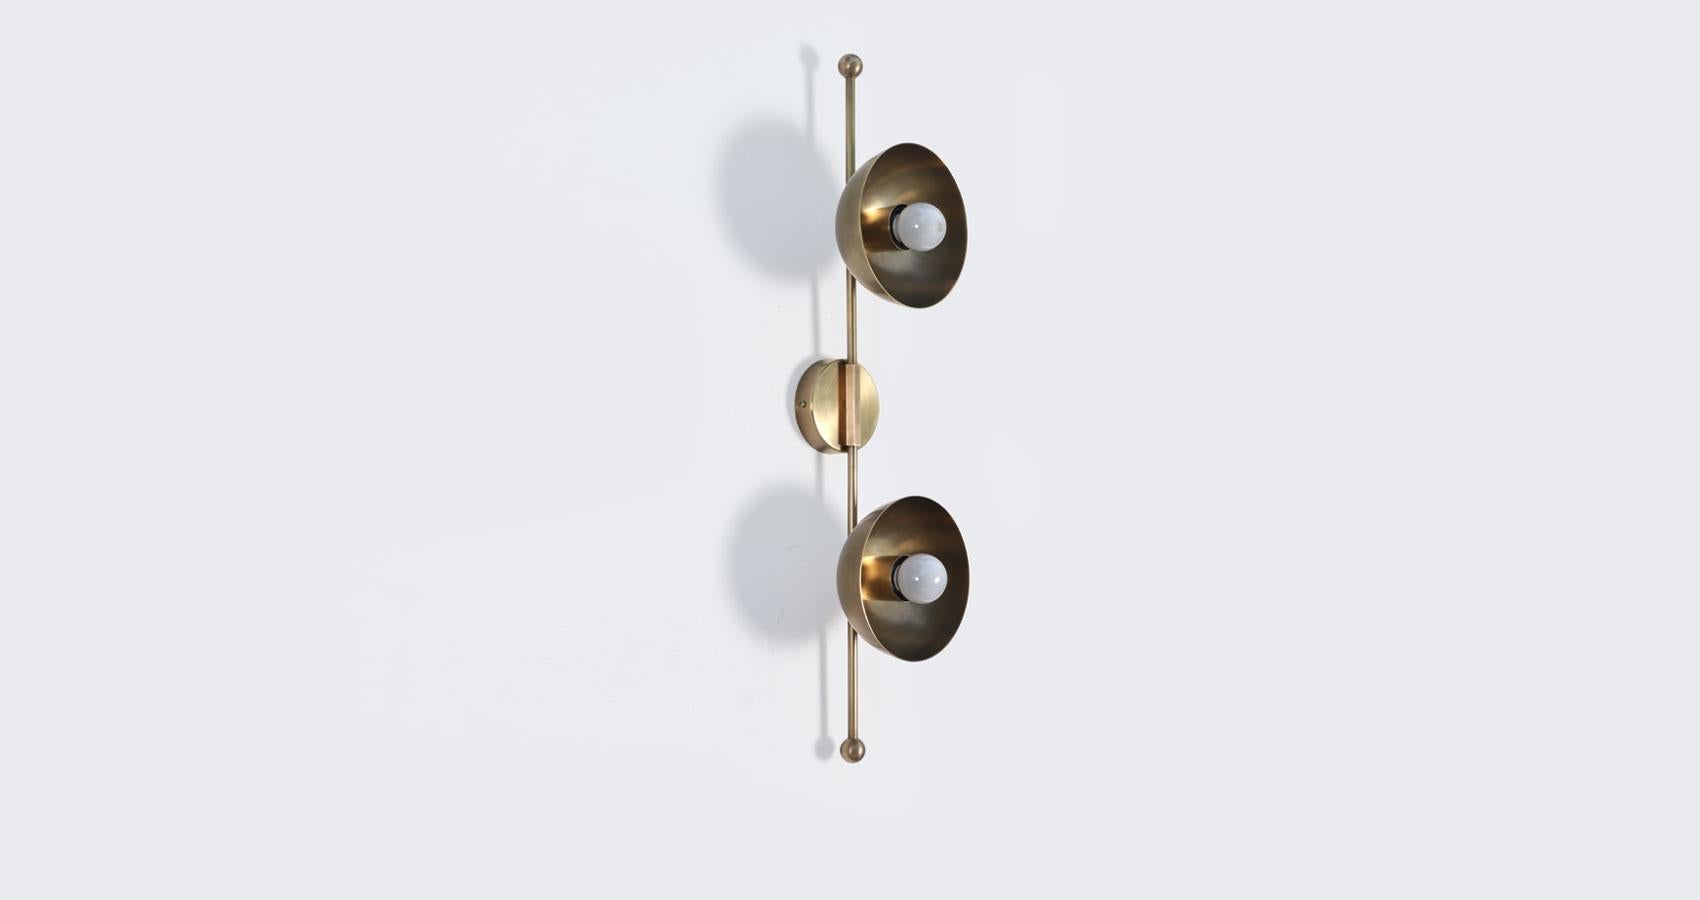 Mod Brass Dome Wall Sconce Two by Lamp Shaper
Dimensions: D 15.5 x W 14 x H 66 cm.
Materials: Brass.

Different finishes available: raw brass, aged brass, burnt brass and brushed brass Please contact us.

All our lamps can be wired according to each